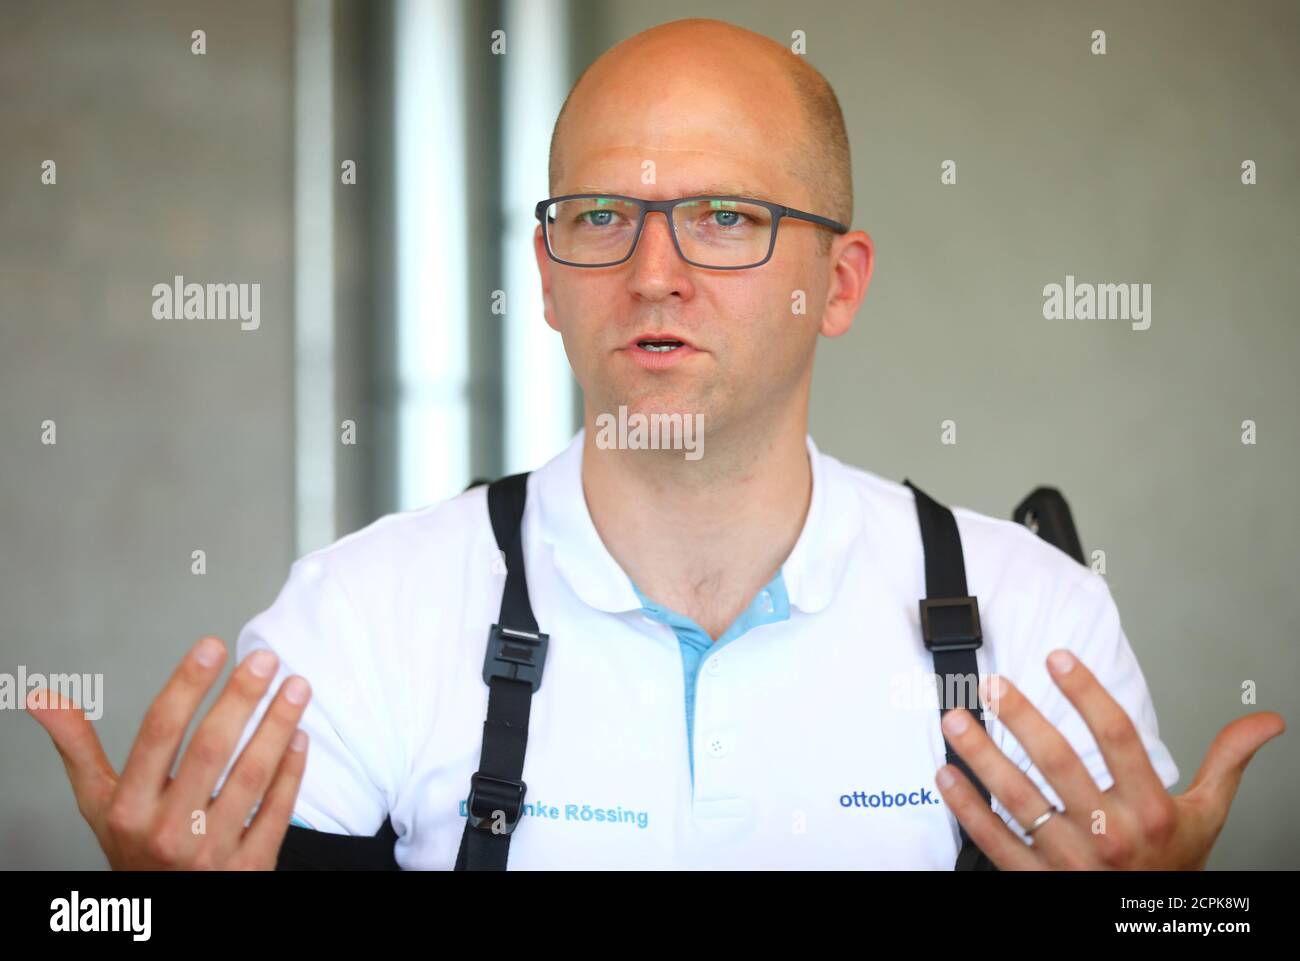 Soenke Rossing, Head of Industrials unit at German prosthetic limb maker Ottobock, during an interview with Reuters in Berlin, Germany, August 23, 2018. Picture taken August 23, 2018. REUTERS/Hannibal Hanschke Stock Photo